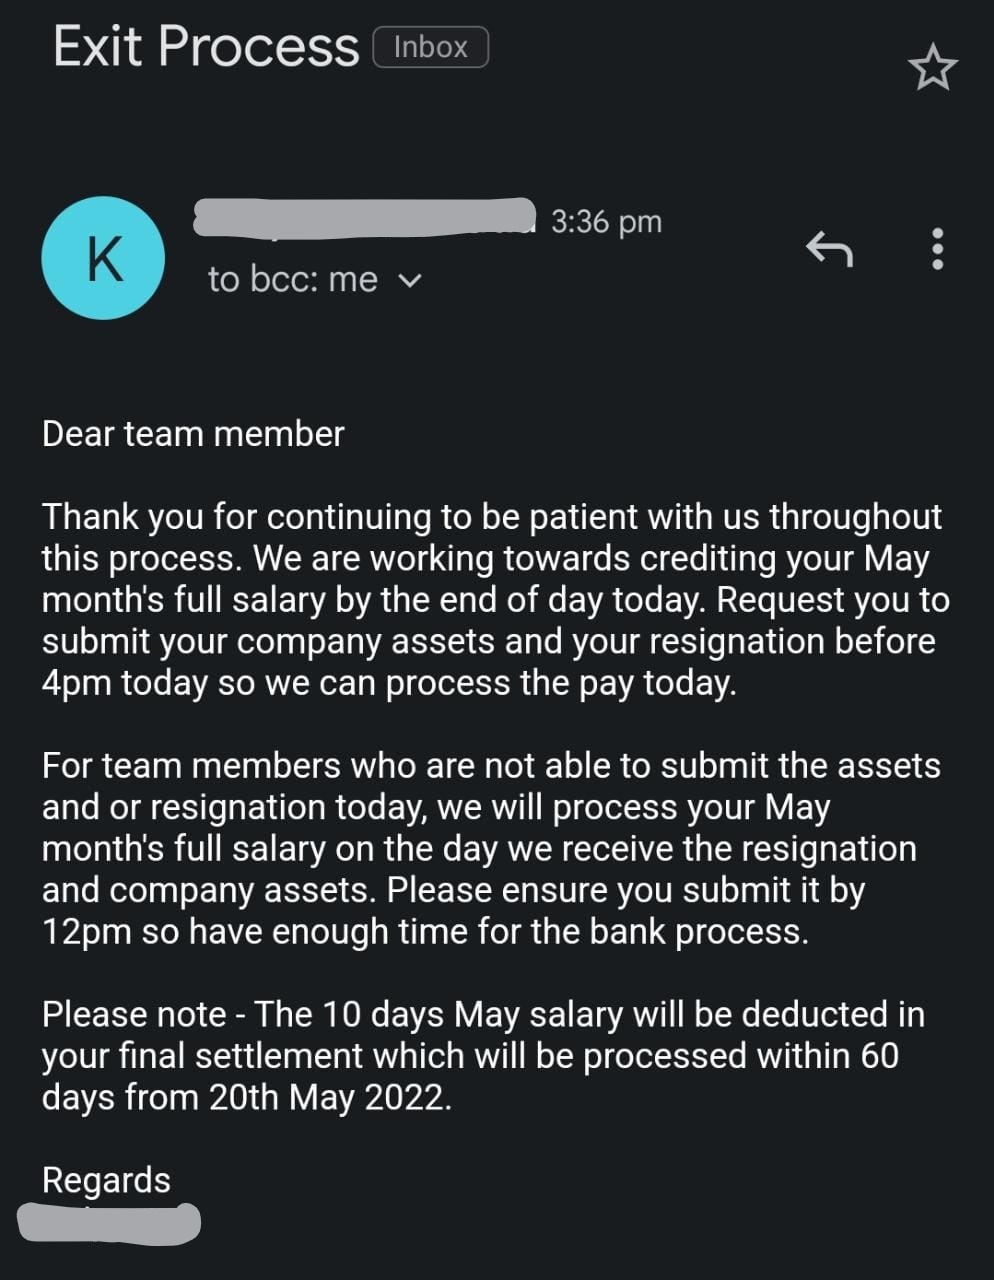 Latest update to MFine employees